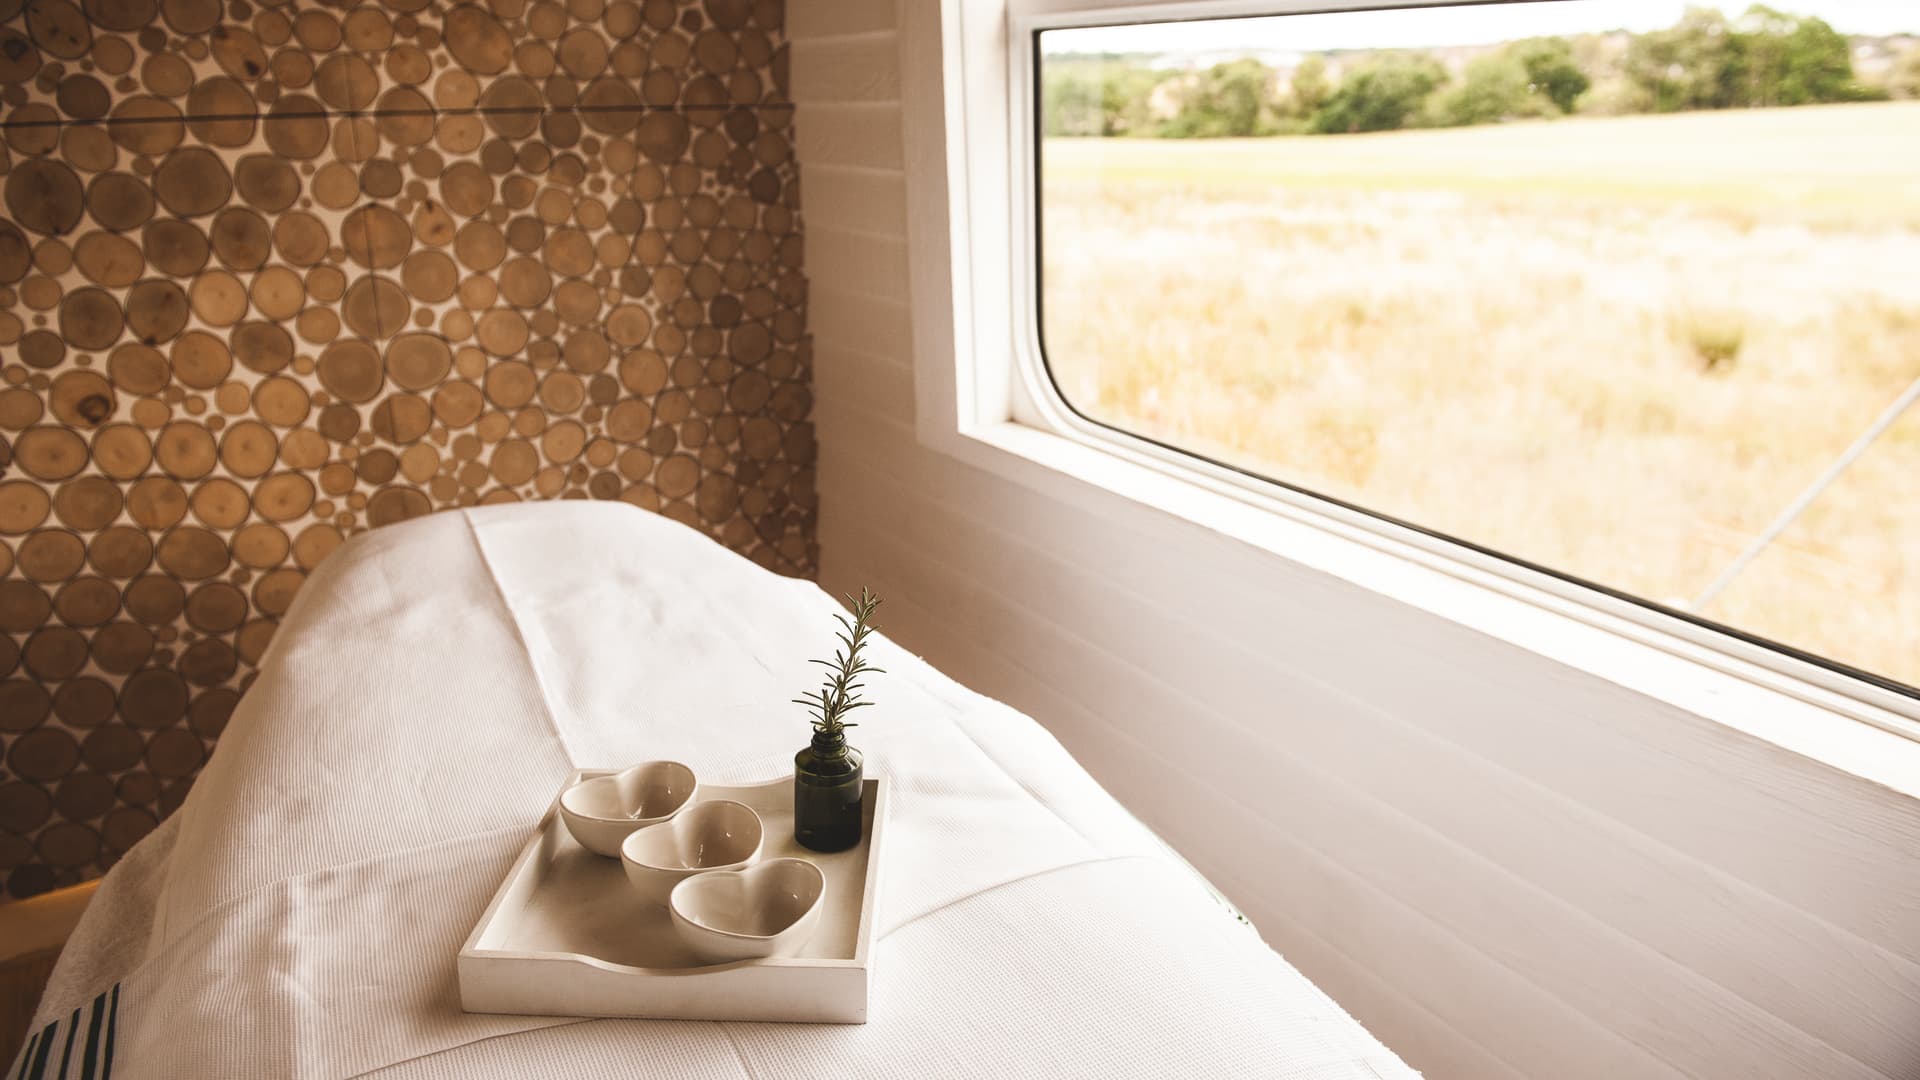 One of two treatments rooms in the train's Bamford Haybarn Spa.